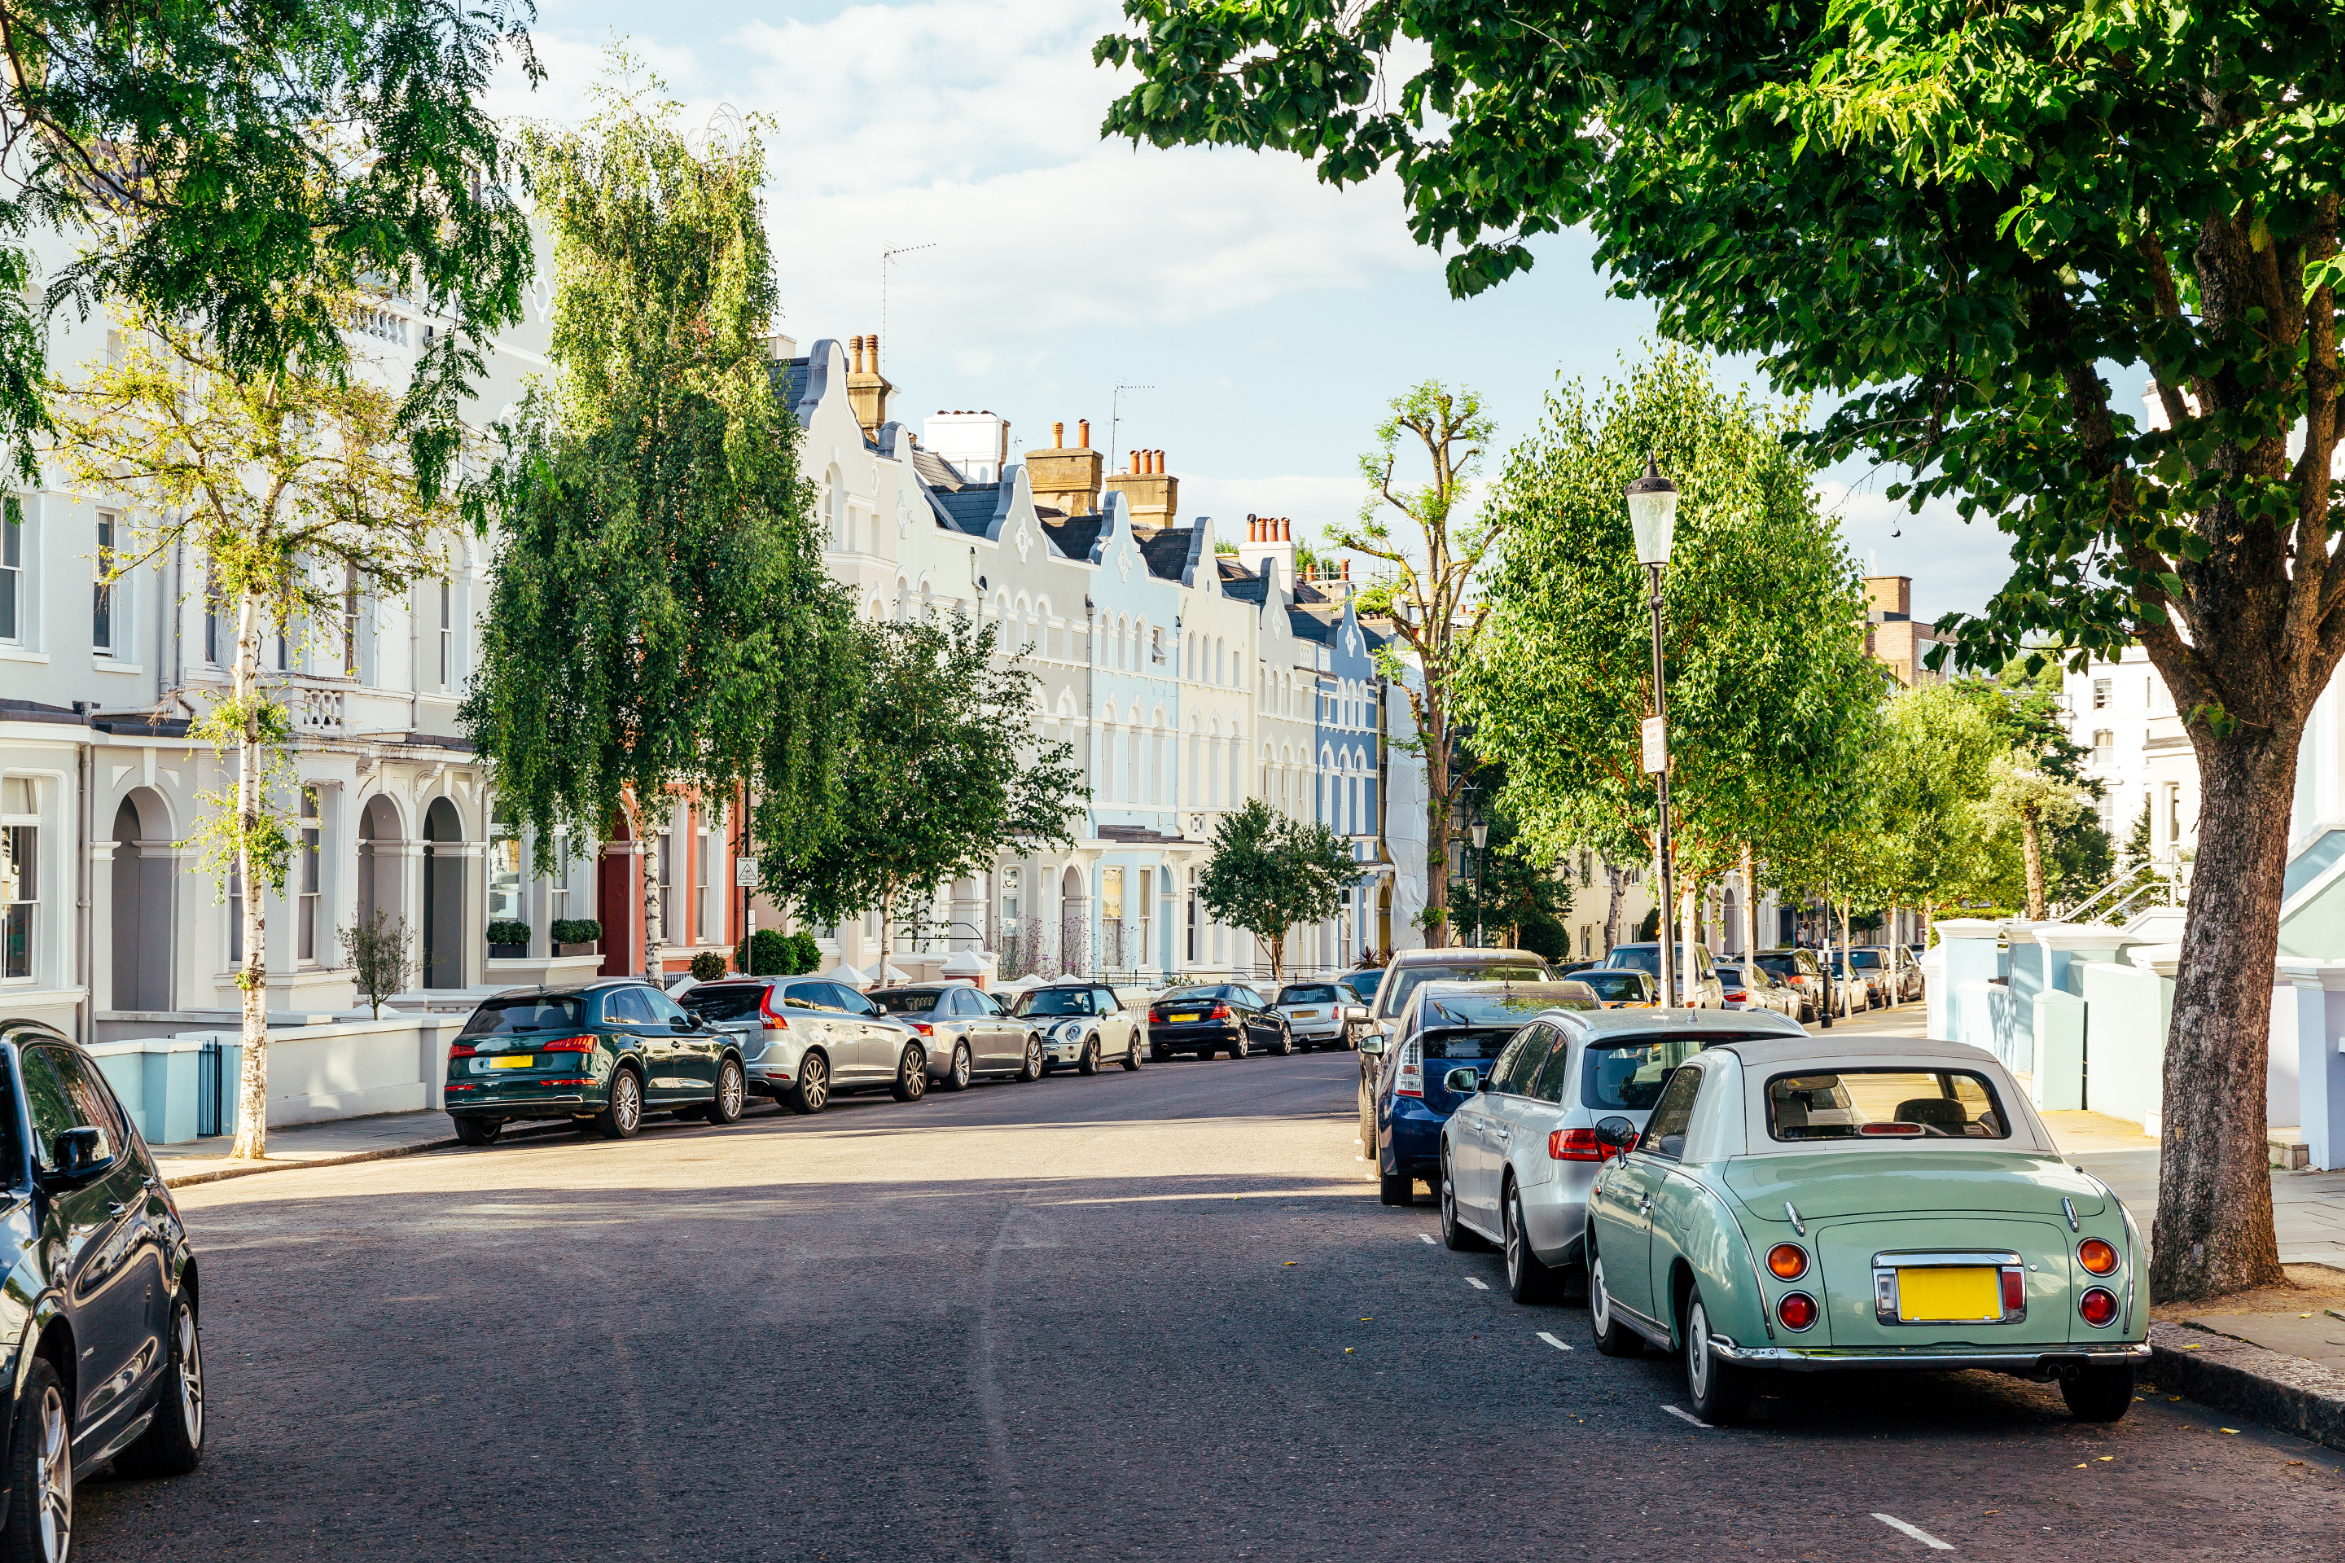 Residential London street, with charming townhouses and cars parked on the road